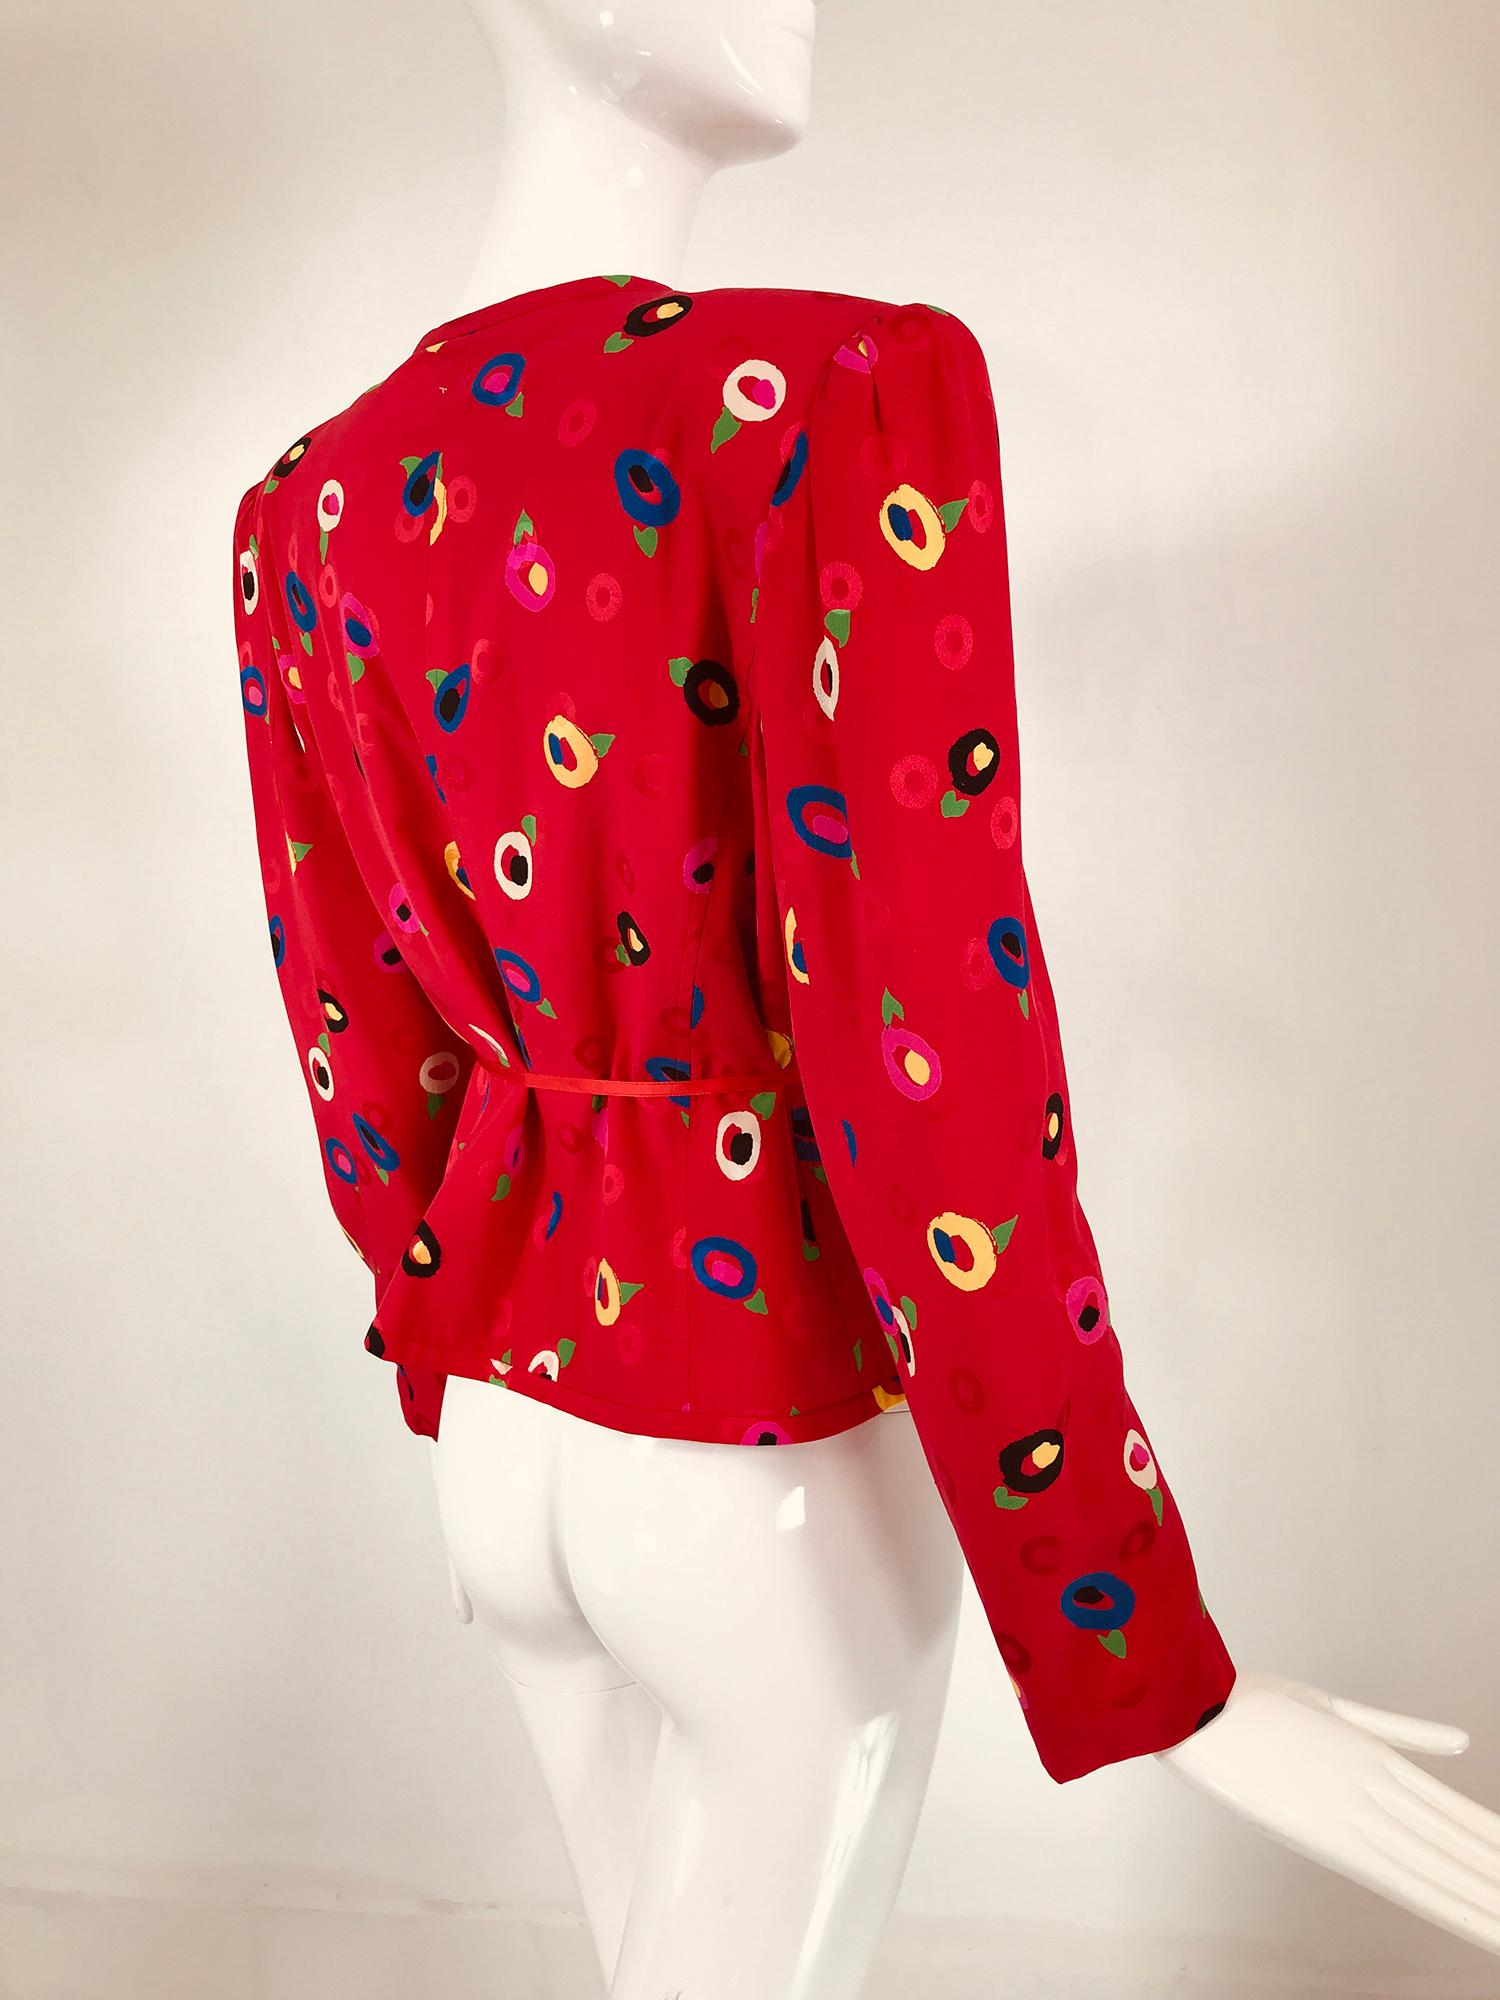 Ungaro Red Printed Silk Jacquard V Neck Button Front Jacket 1980s For Sale 5